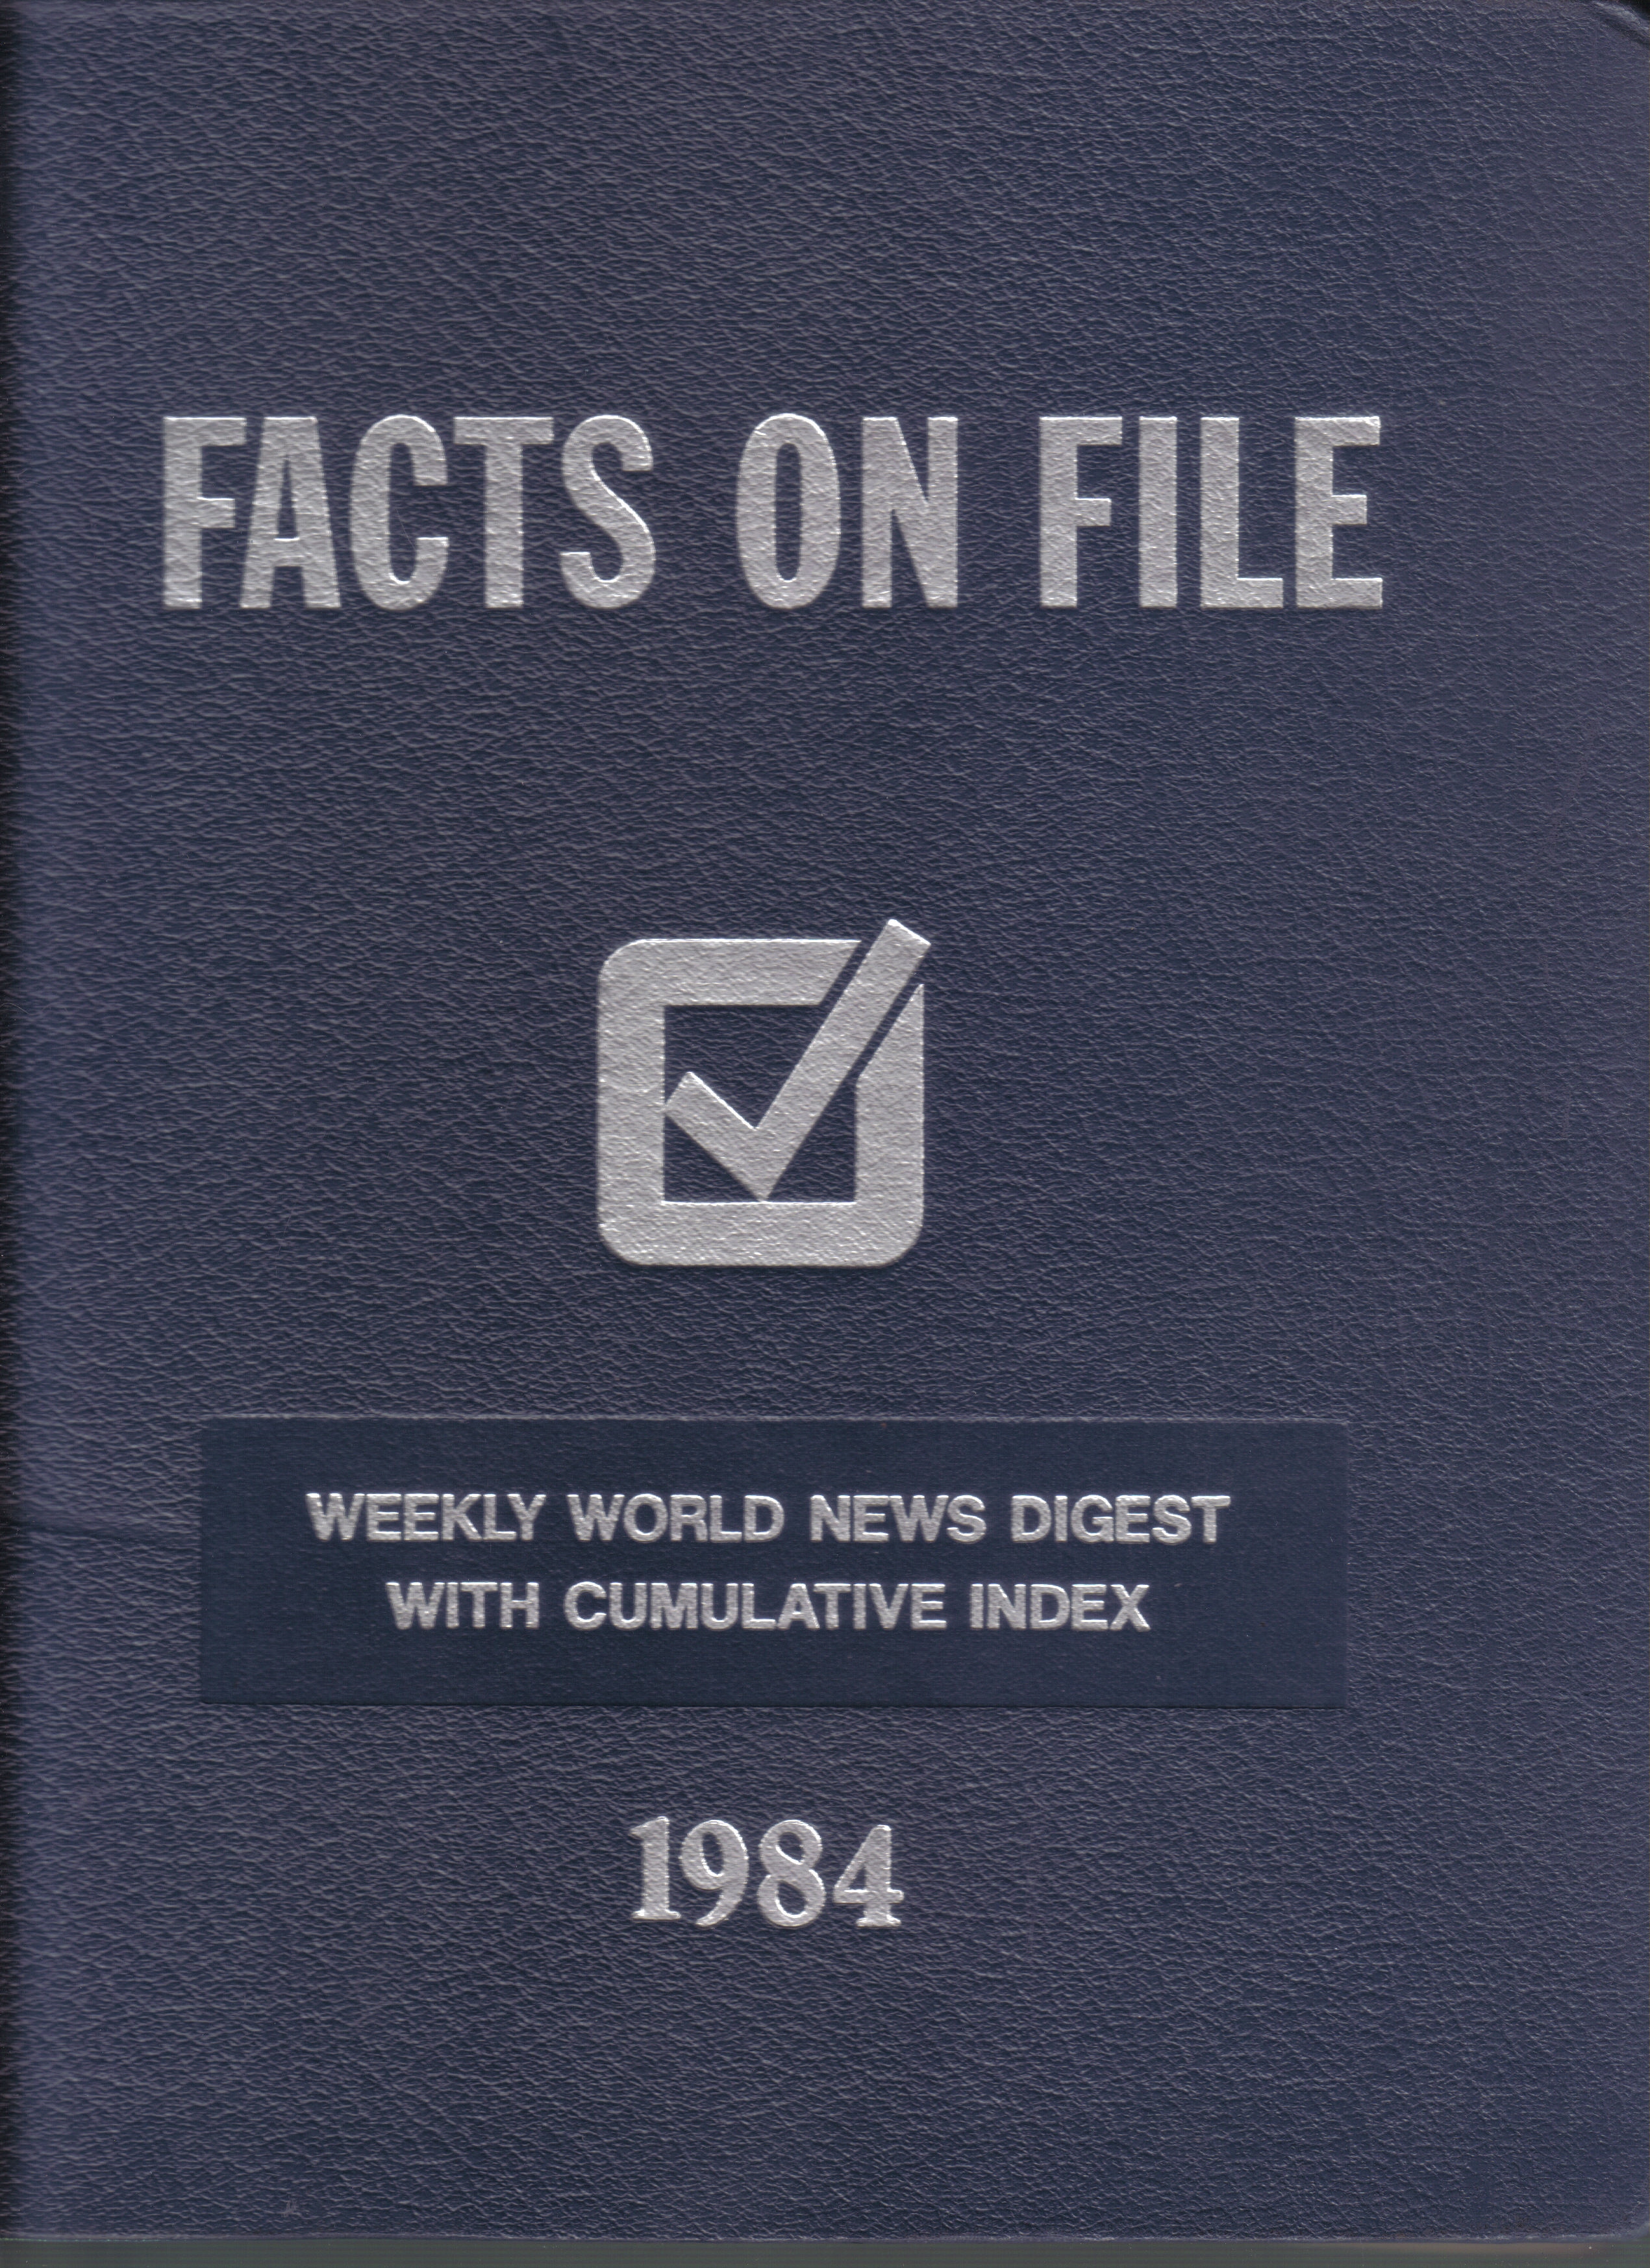 Facts on File  Facts on File Volume 44 1984 